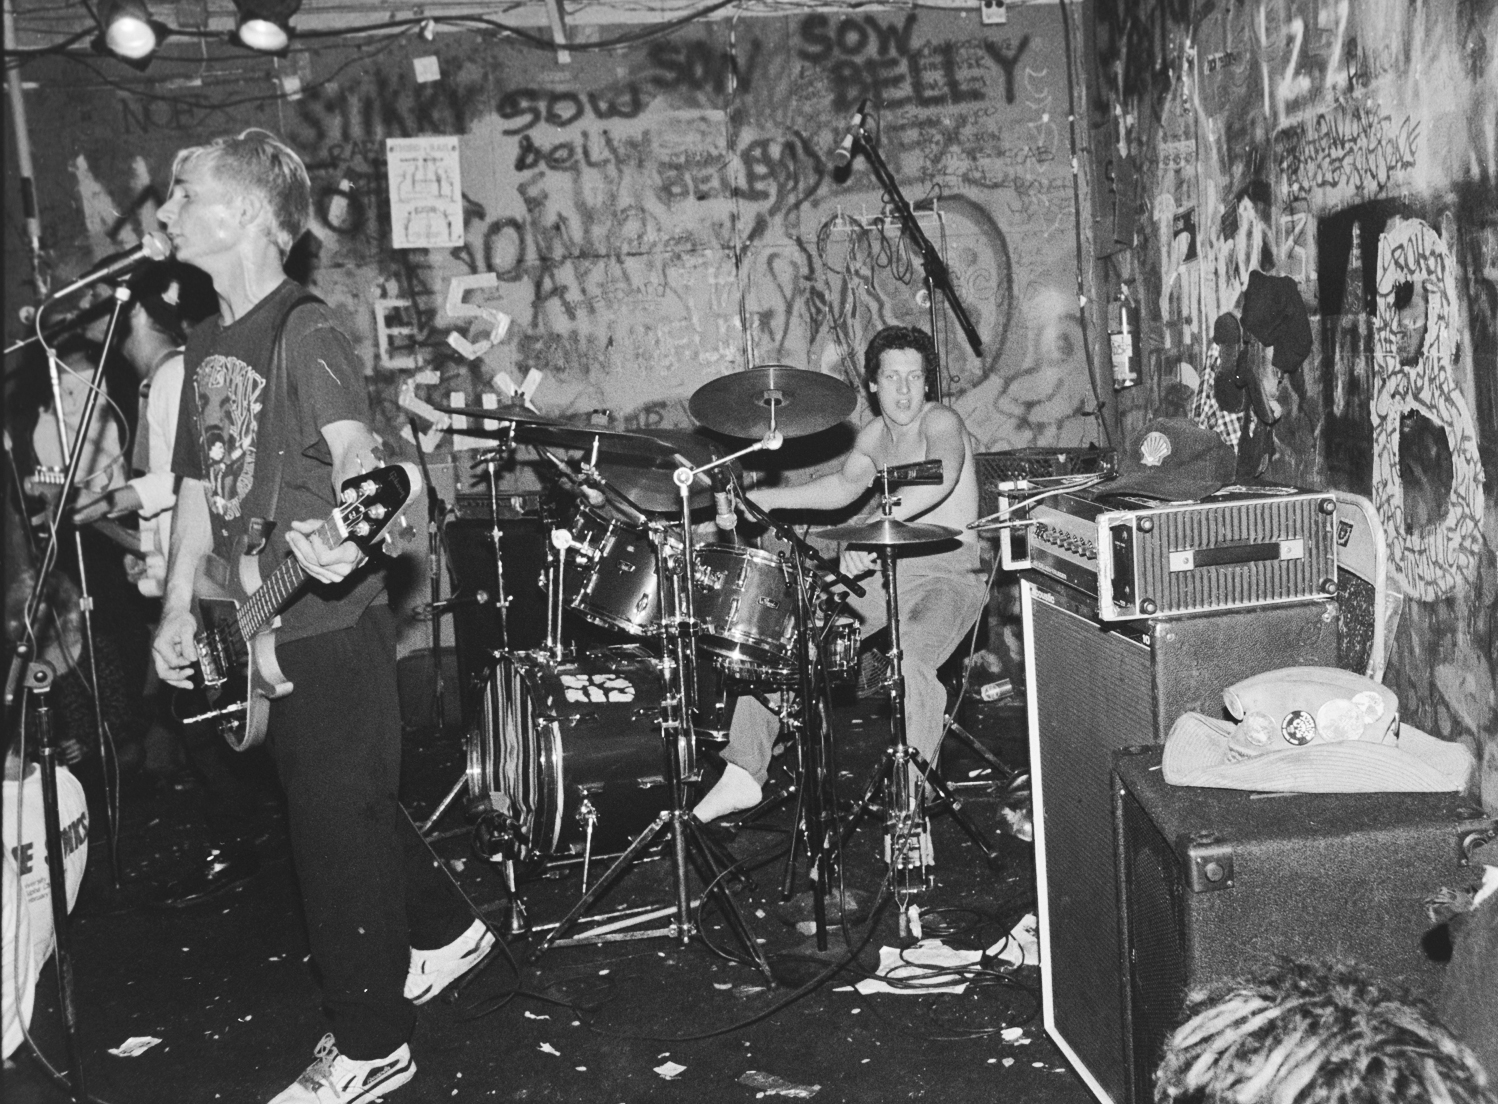 Green Day performs at 924 Gilman Street on Oct. 26, 1990 in Berkely, Calif.